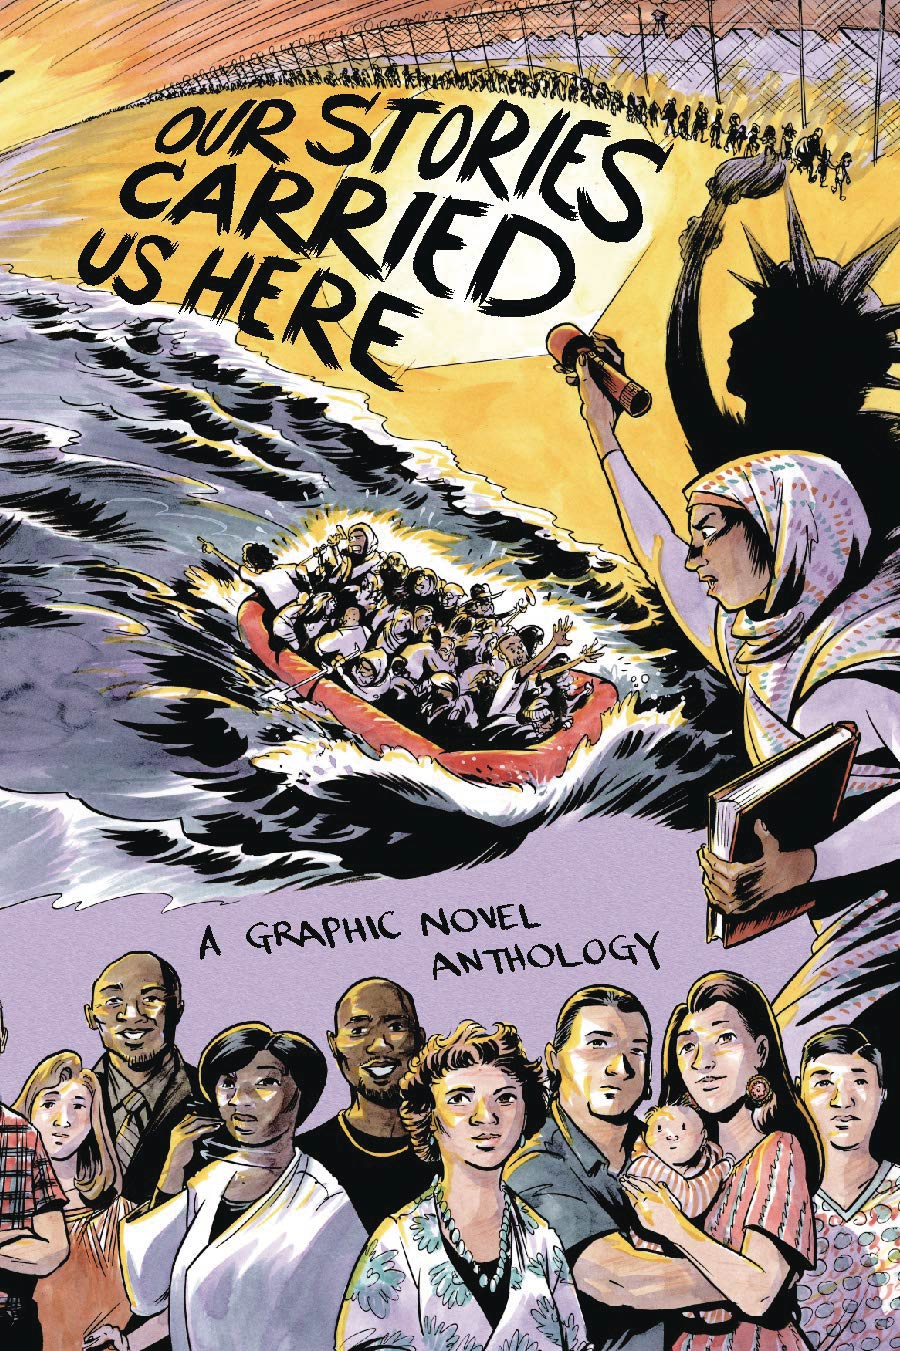 Our Stories Carried Us Here A Graphic Novel Anthology HC